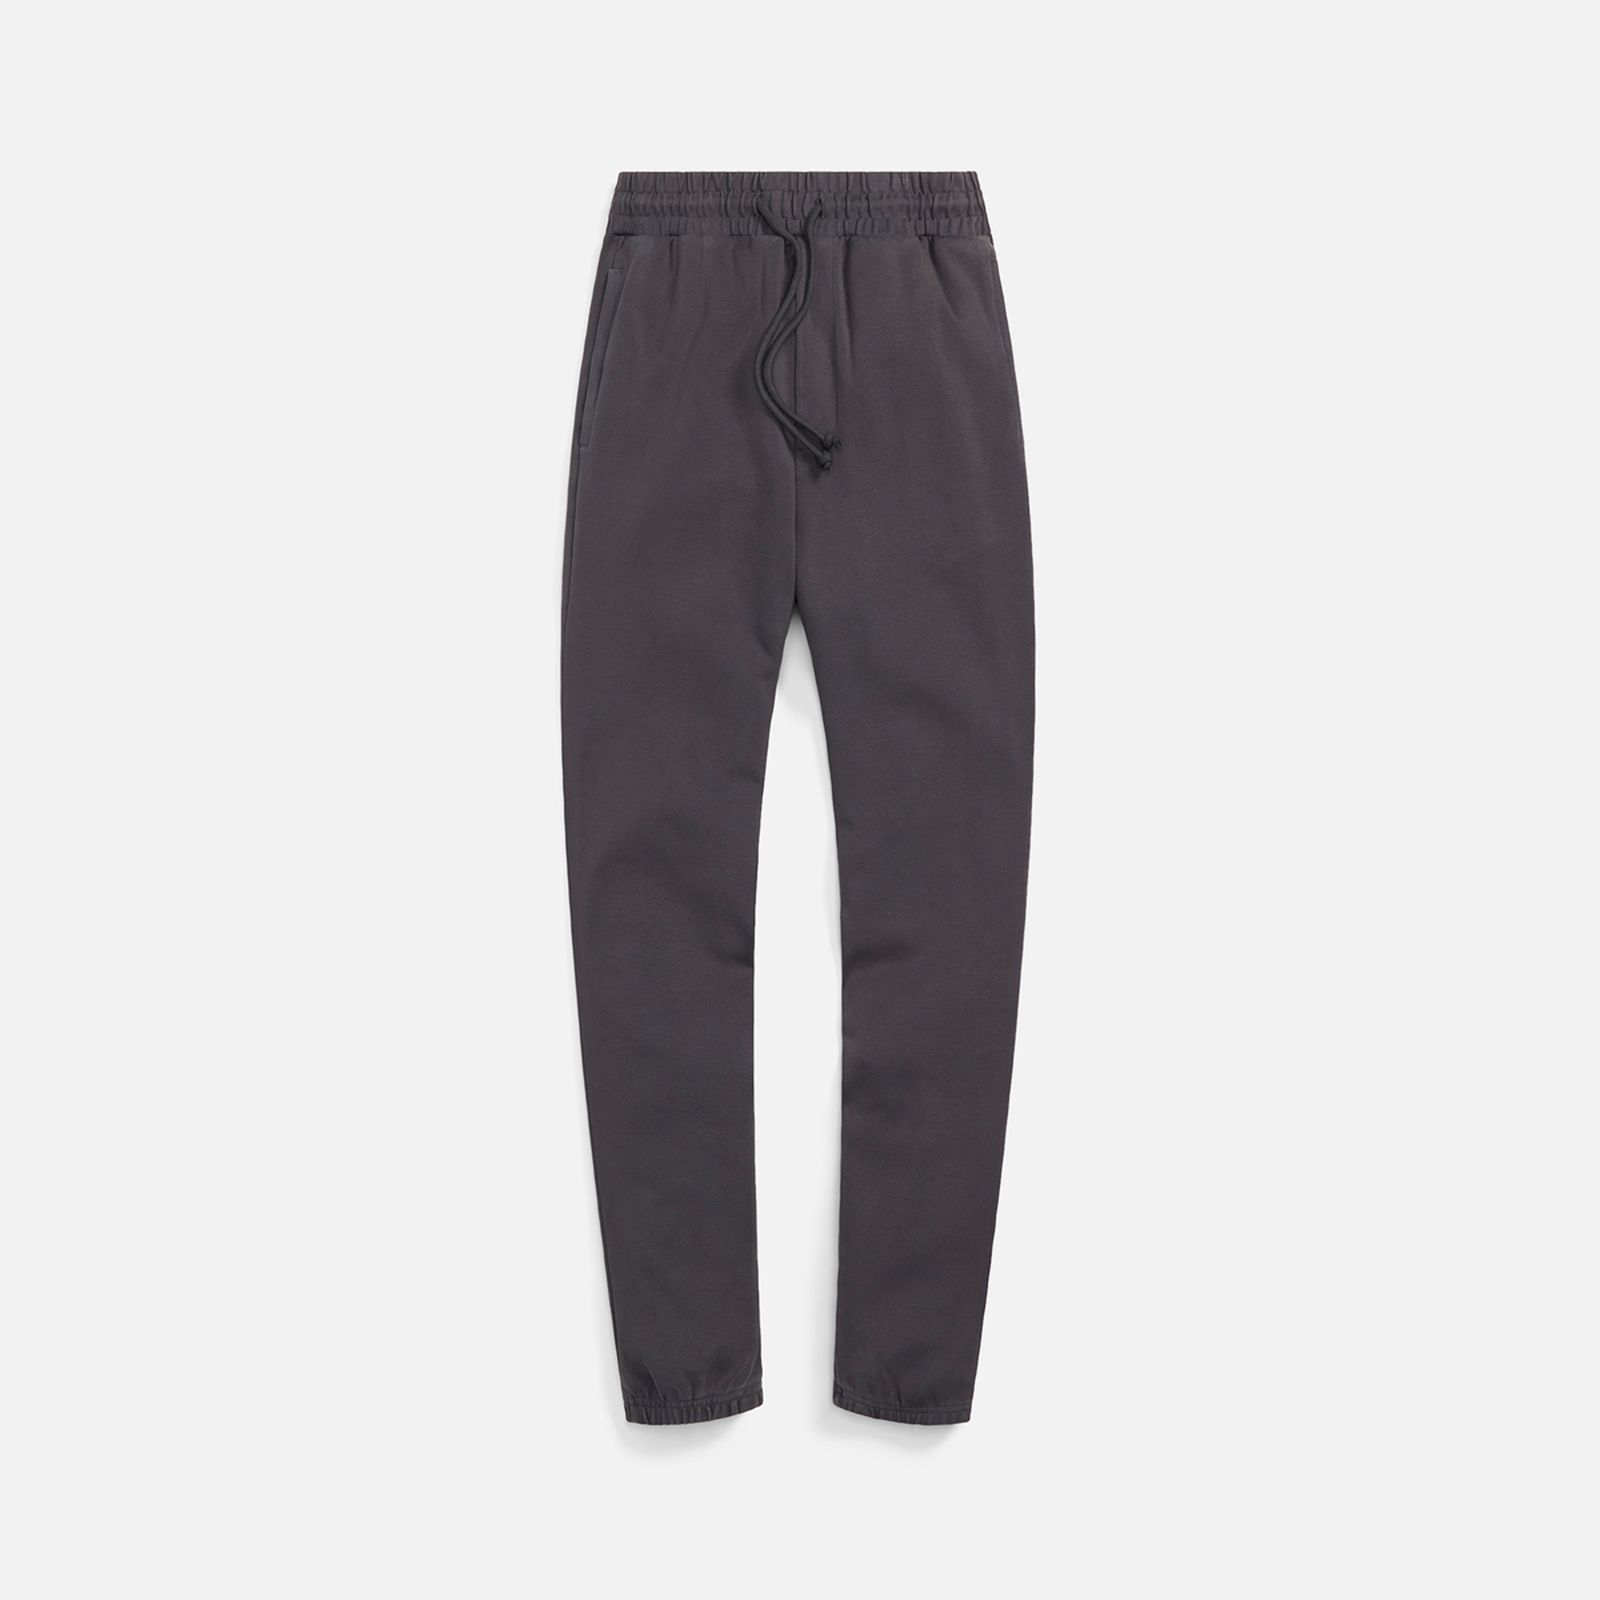 kith-fall-winter-2021-collection-bottoms-17